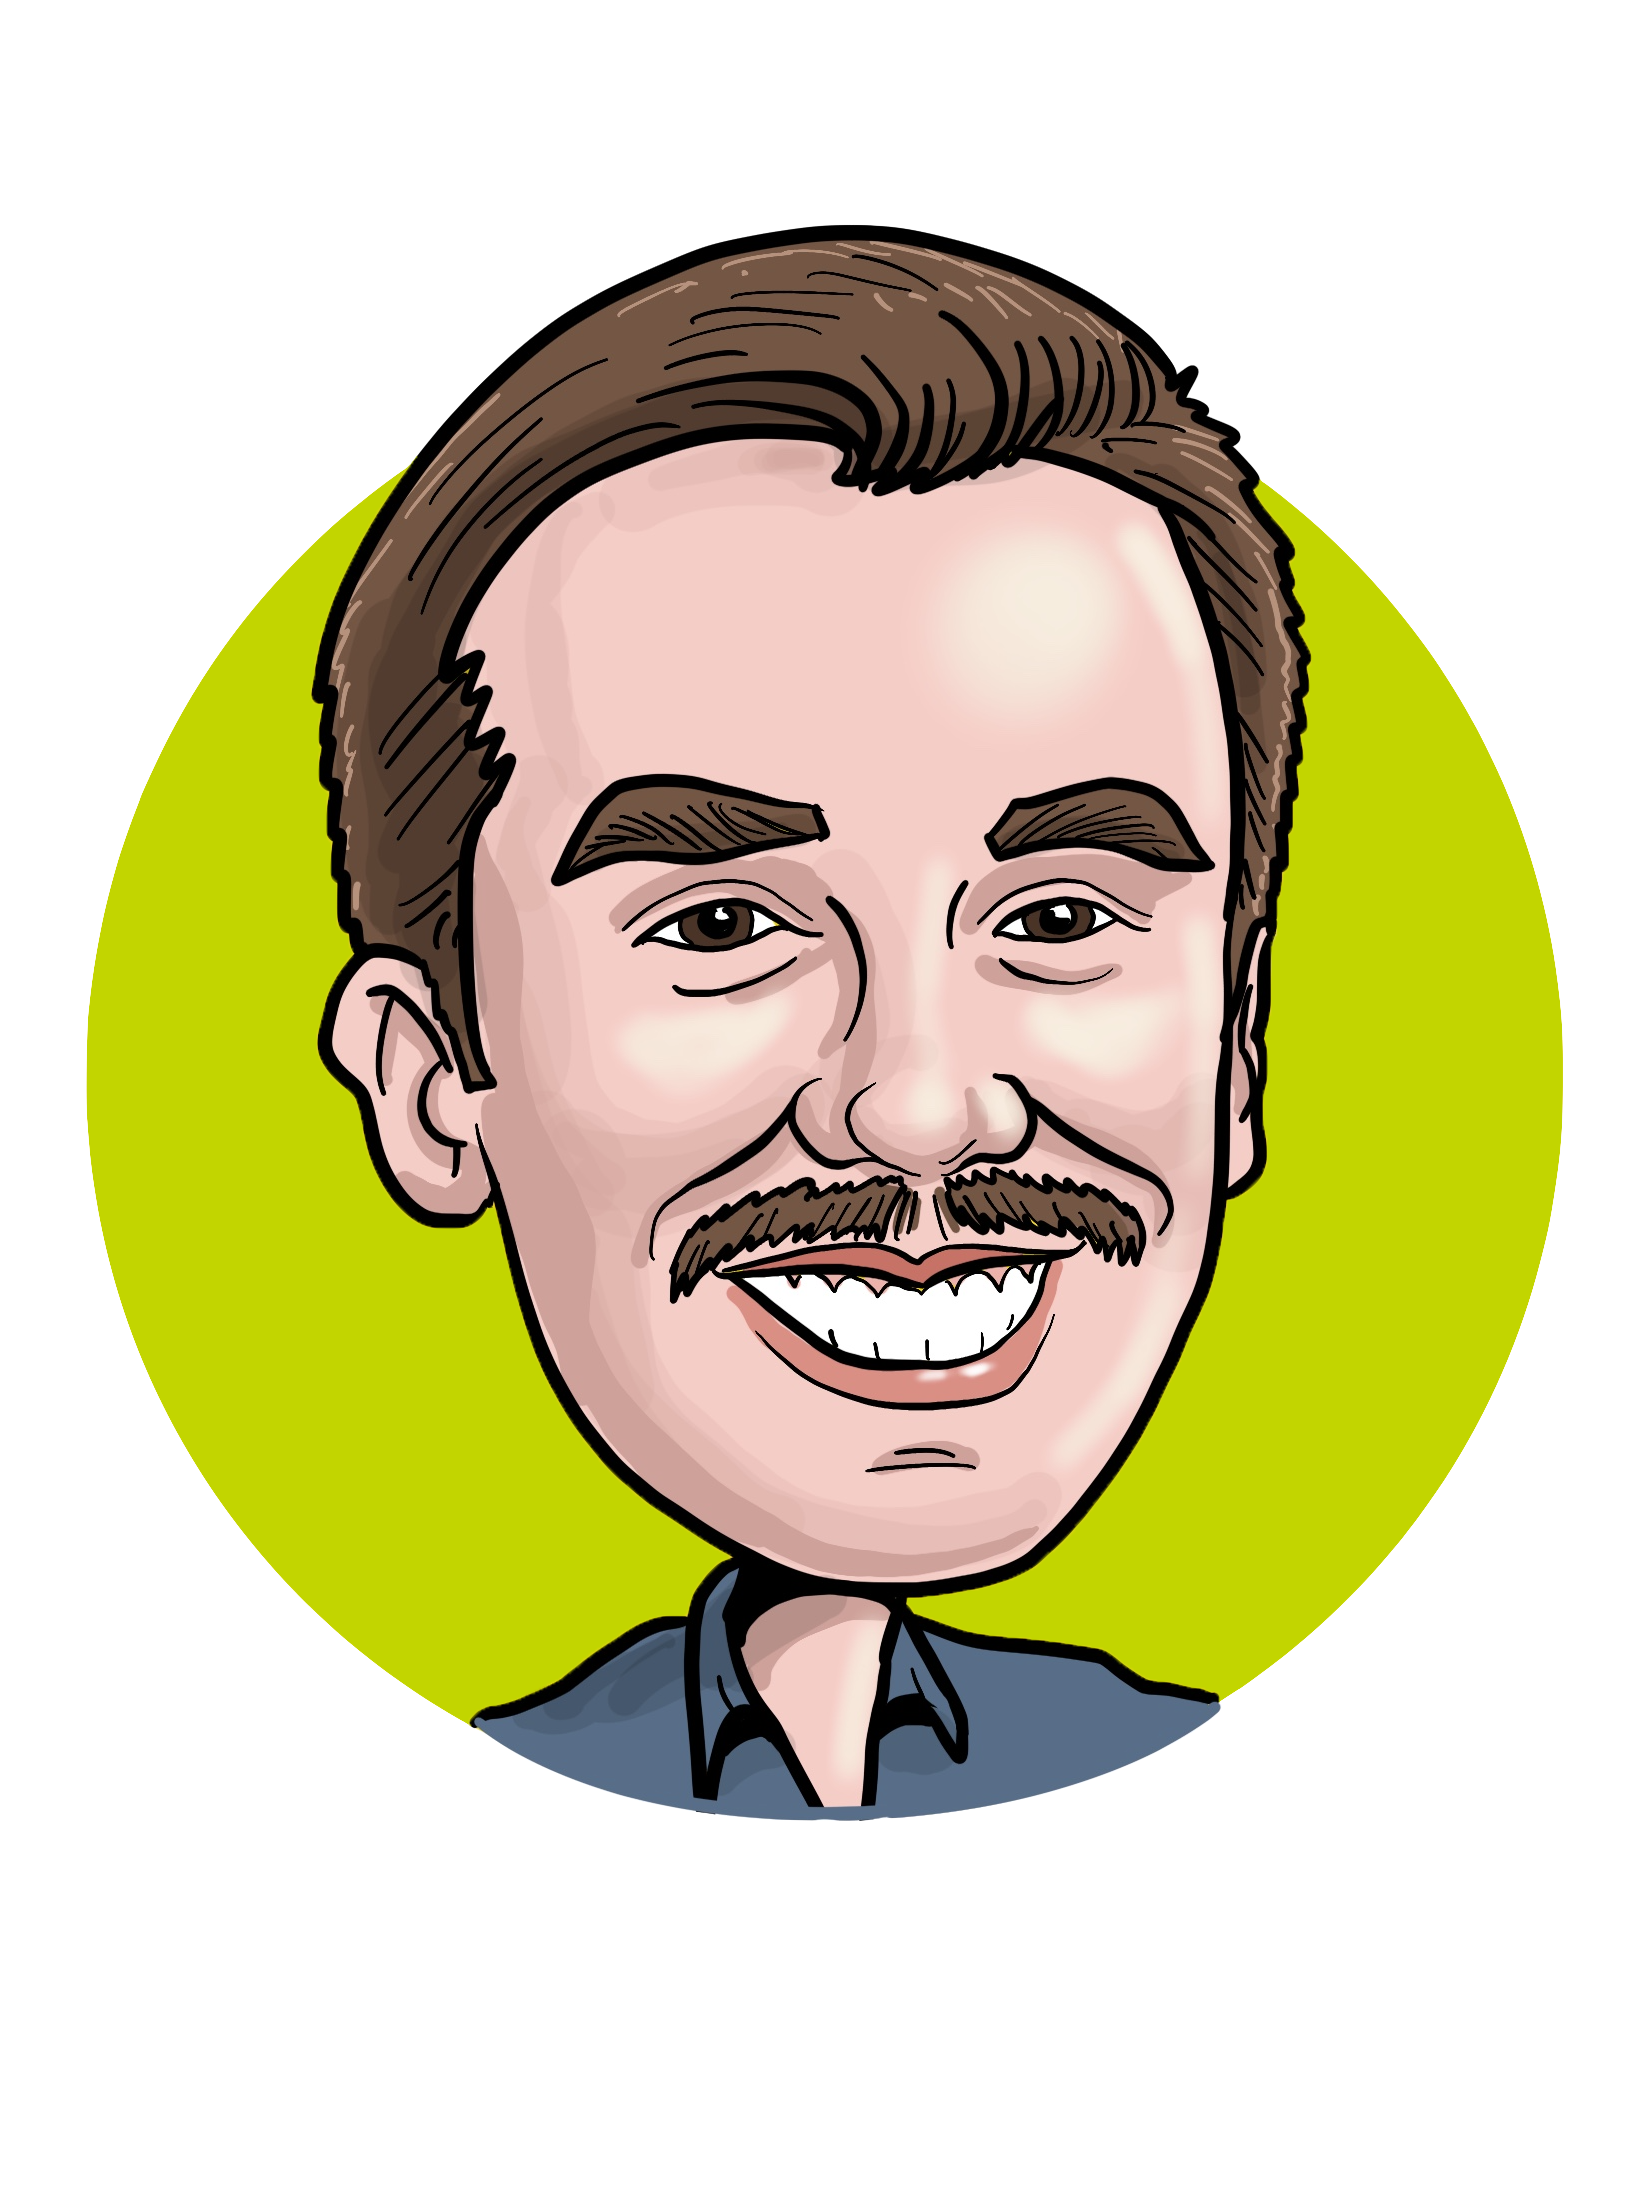 a caricature-style drawing of Jason Chappuies's headshot